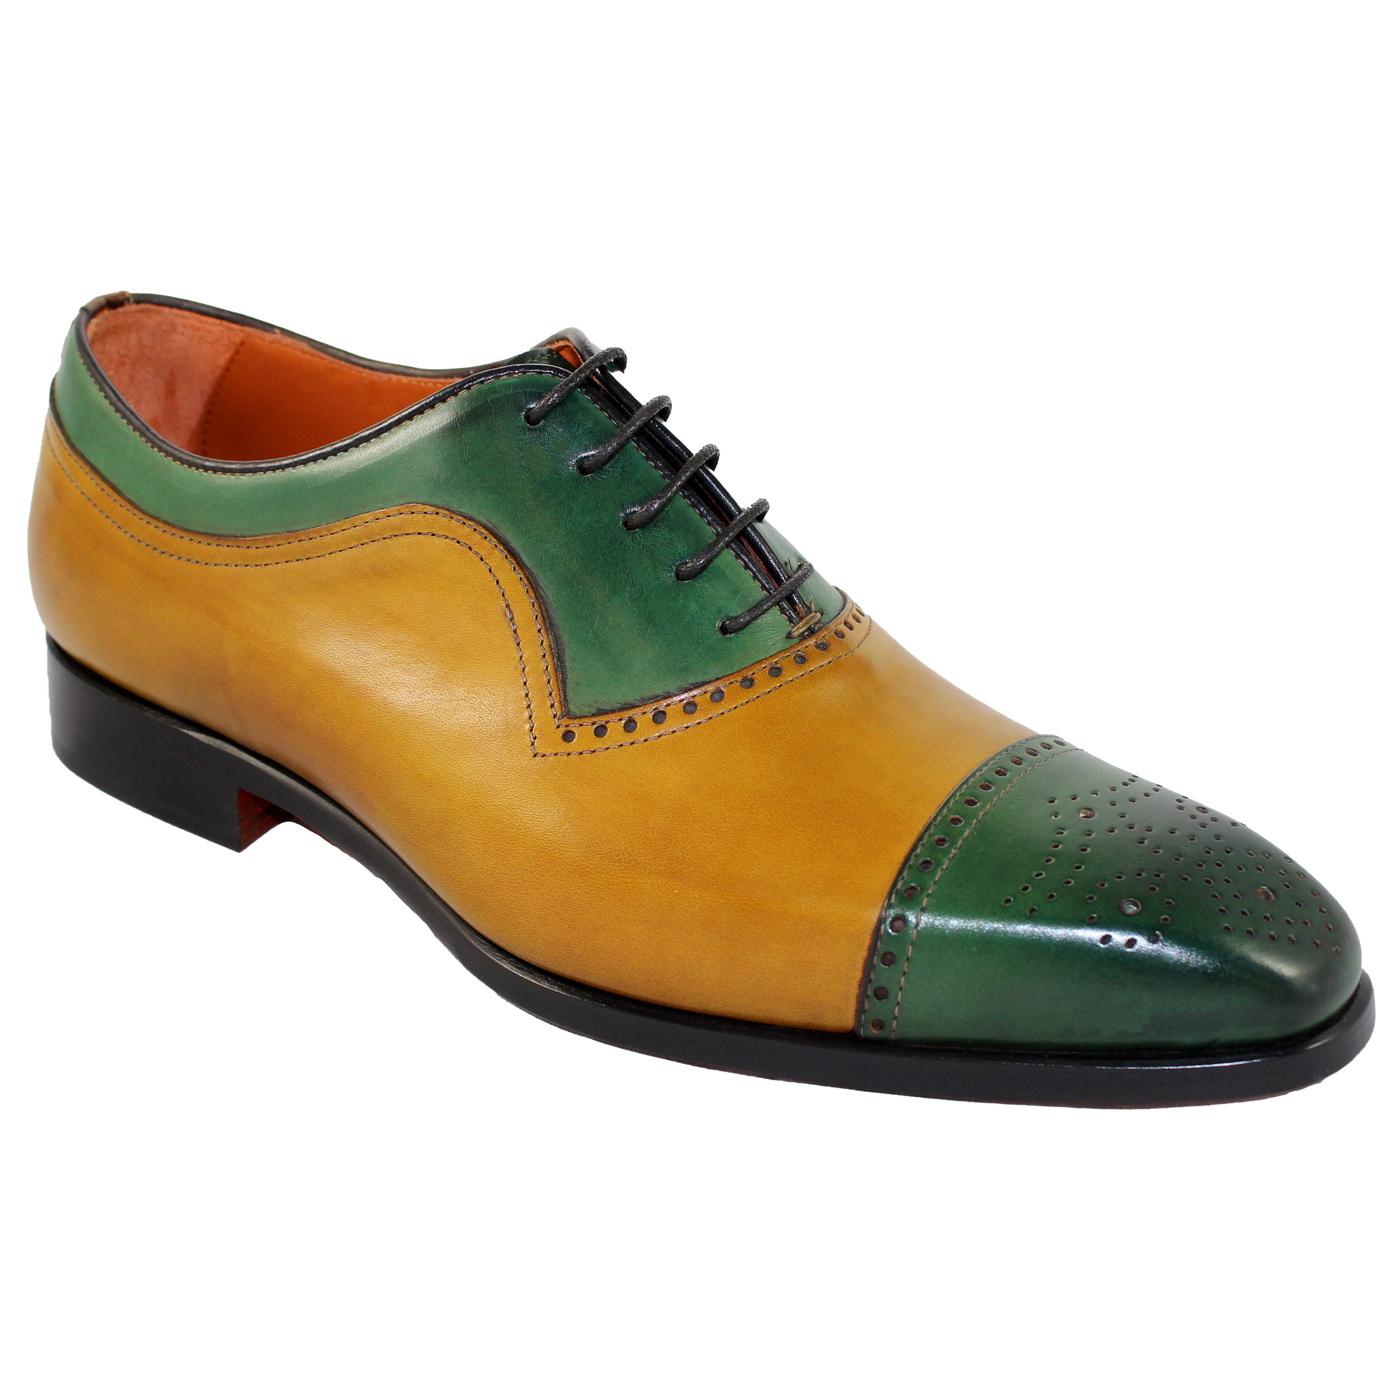 mustard oxford shoes